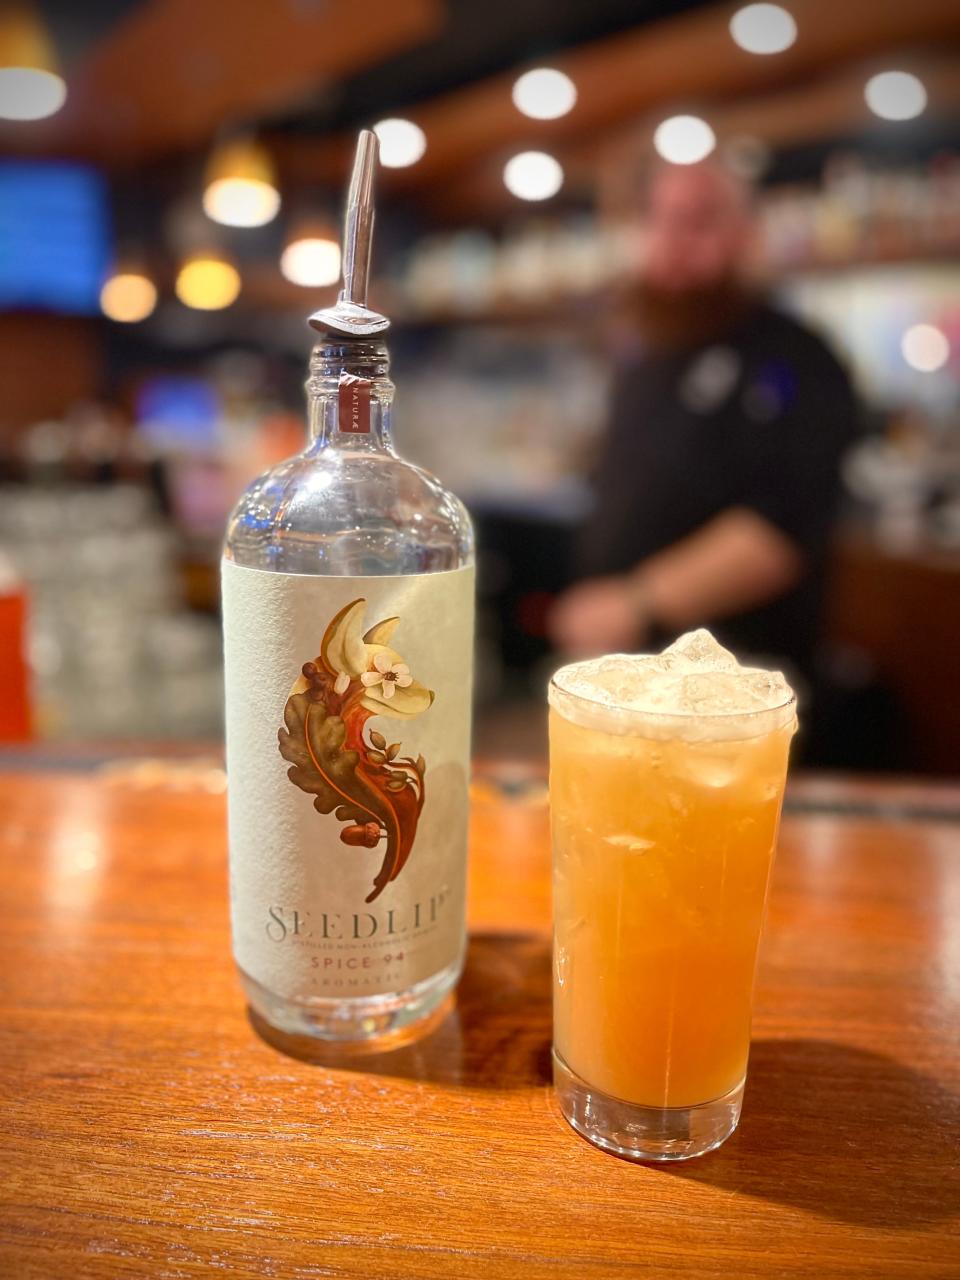 Ginger Fox is a mocktail Home Grown Café created by Executive Chef Andrew Thorne.